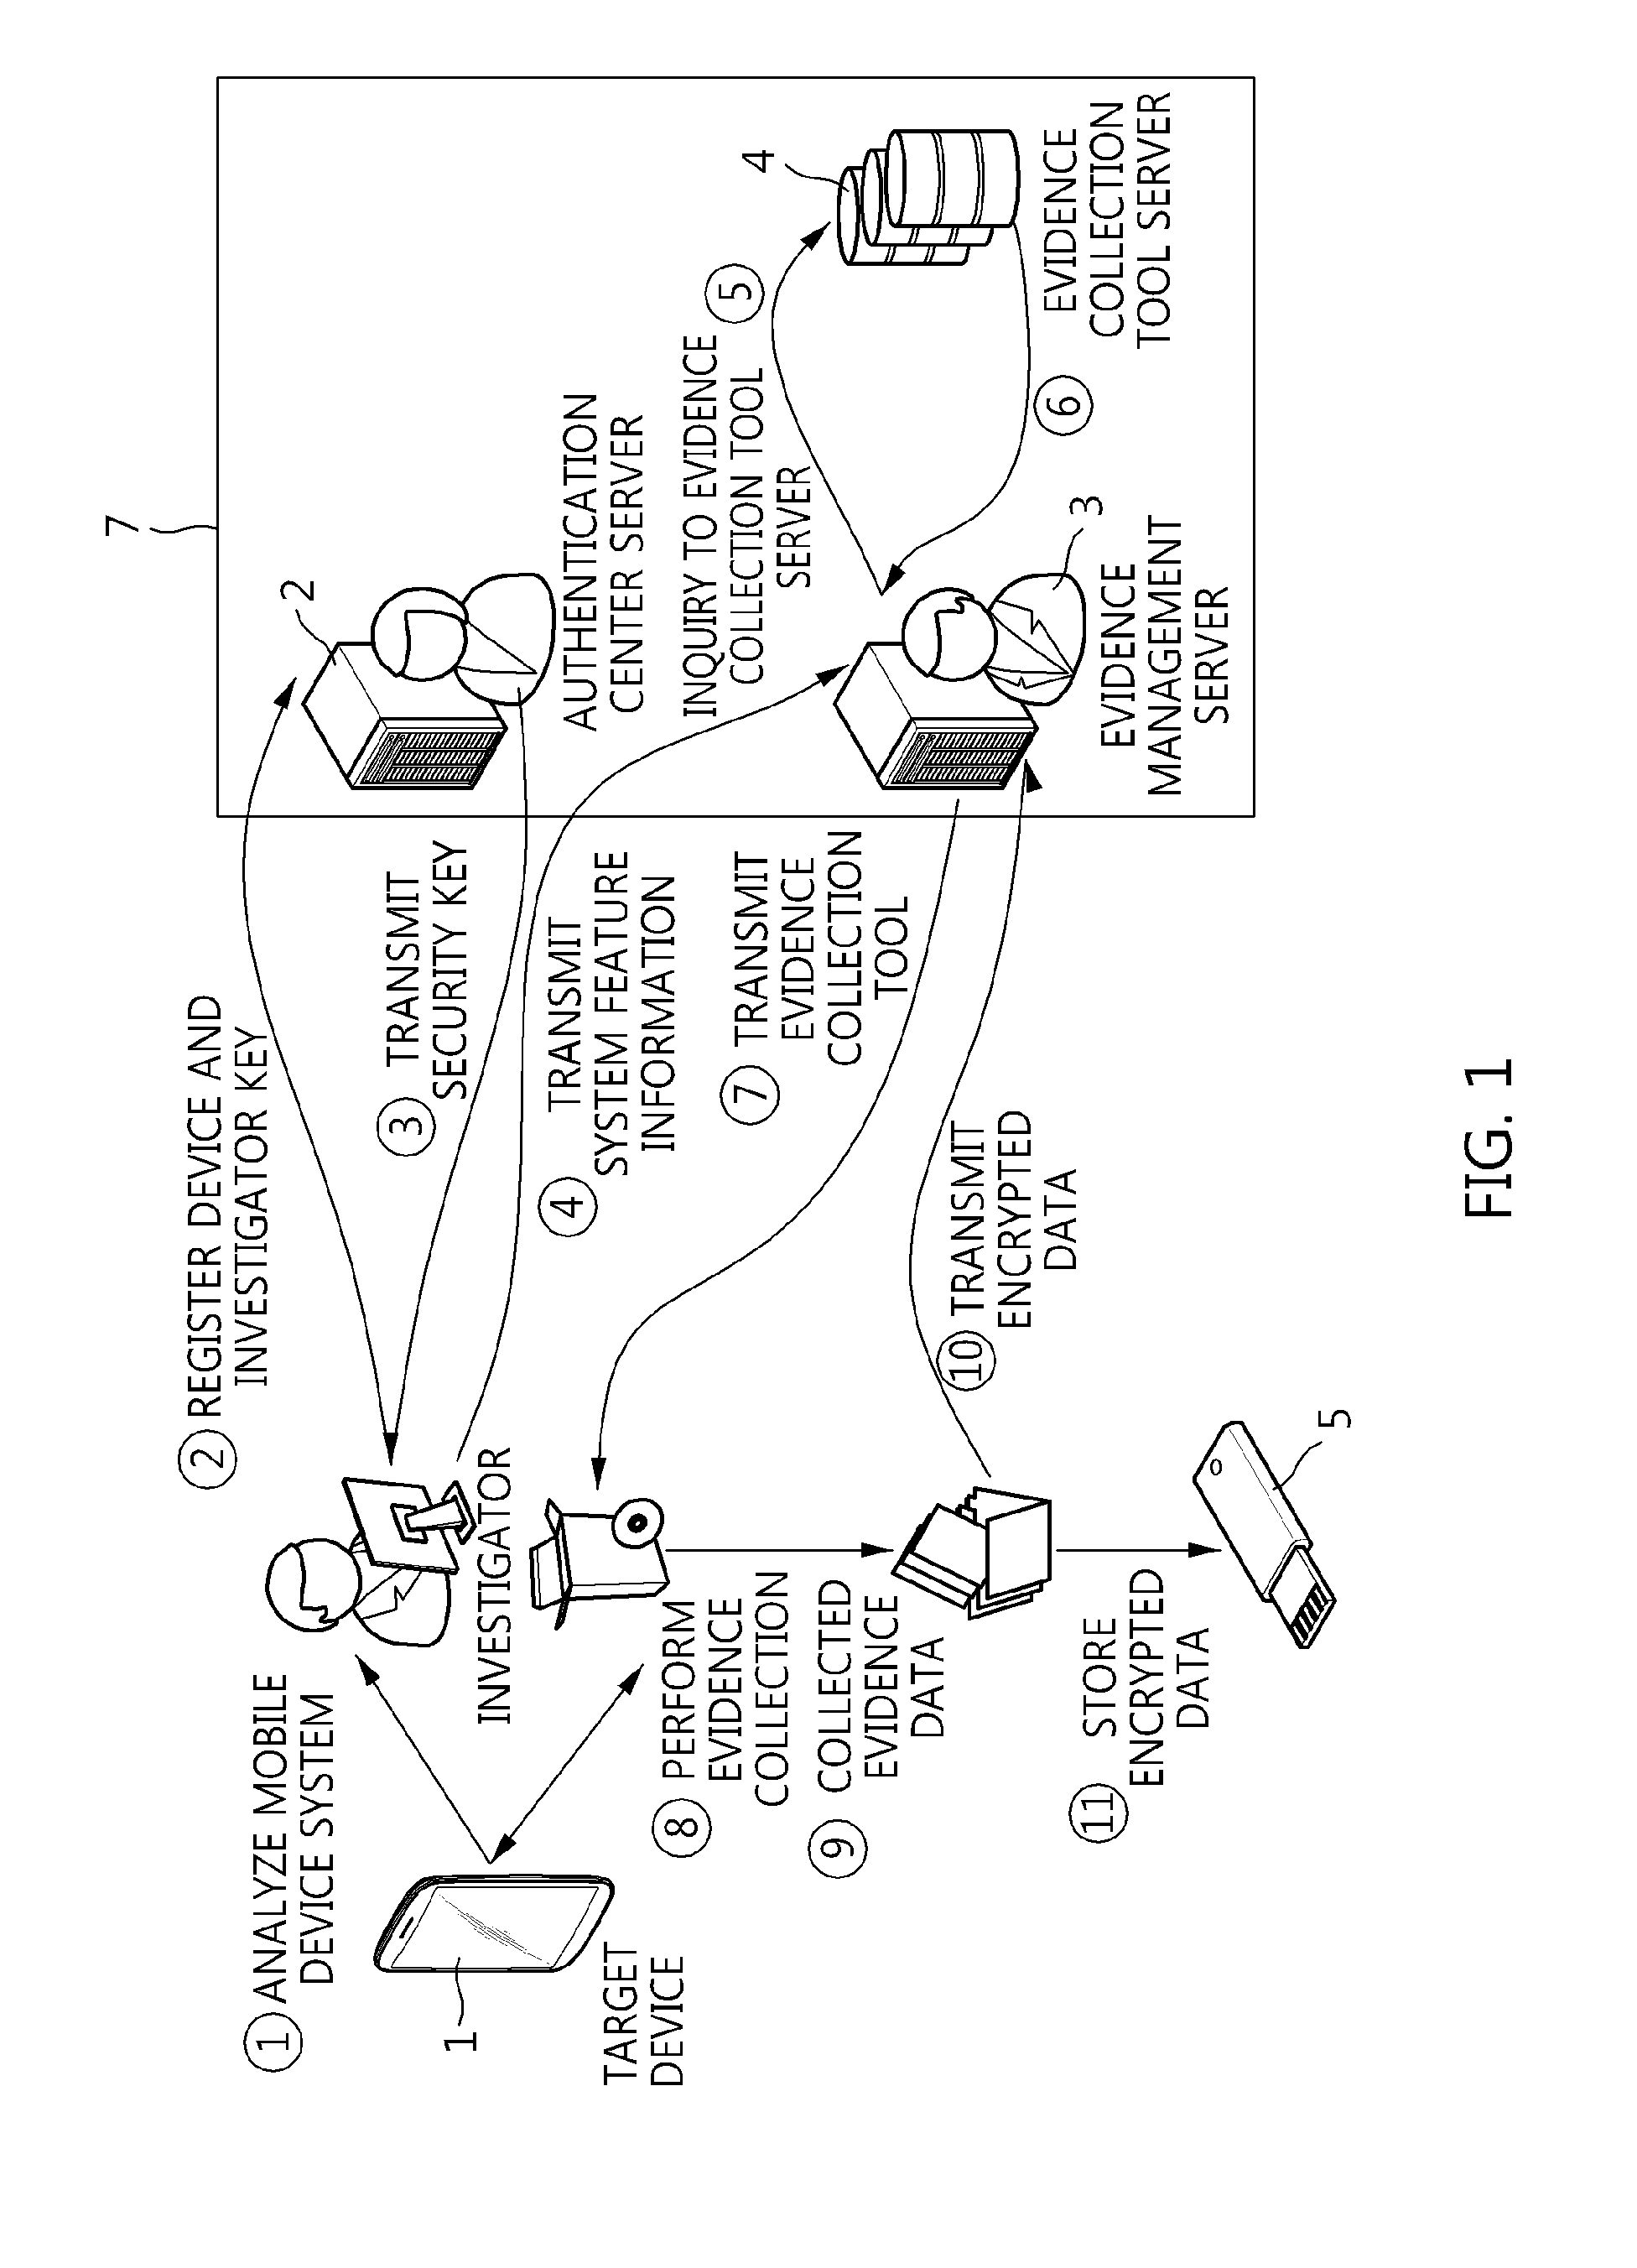 Method of providing evidence collection tool, and apparatus and method for collecting digital evidence in domain separation-based mobile device